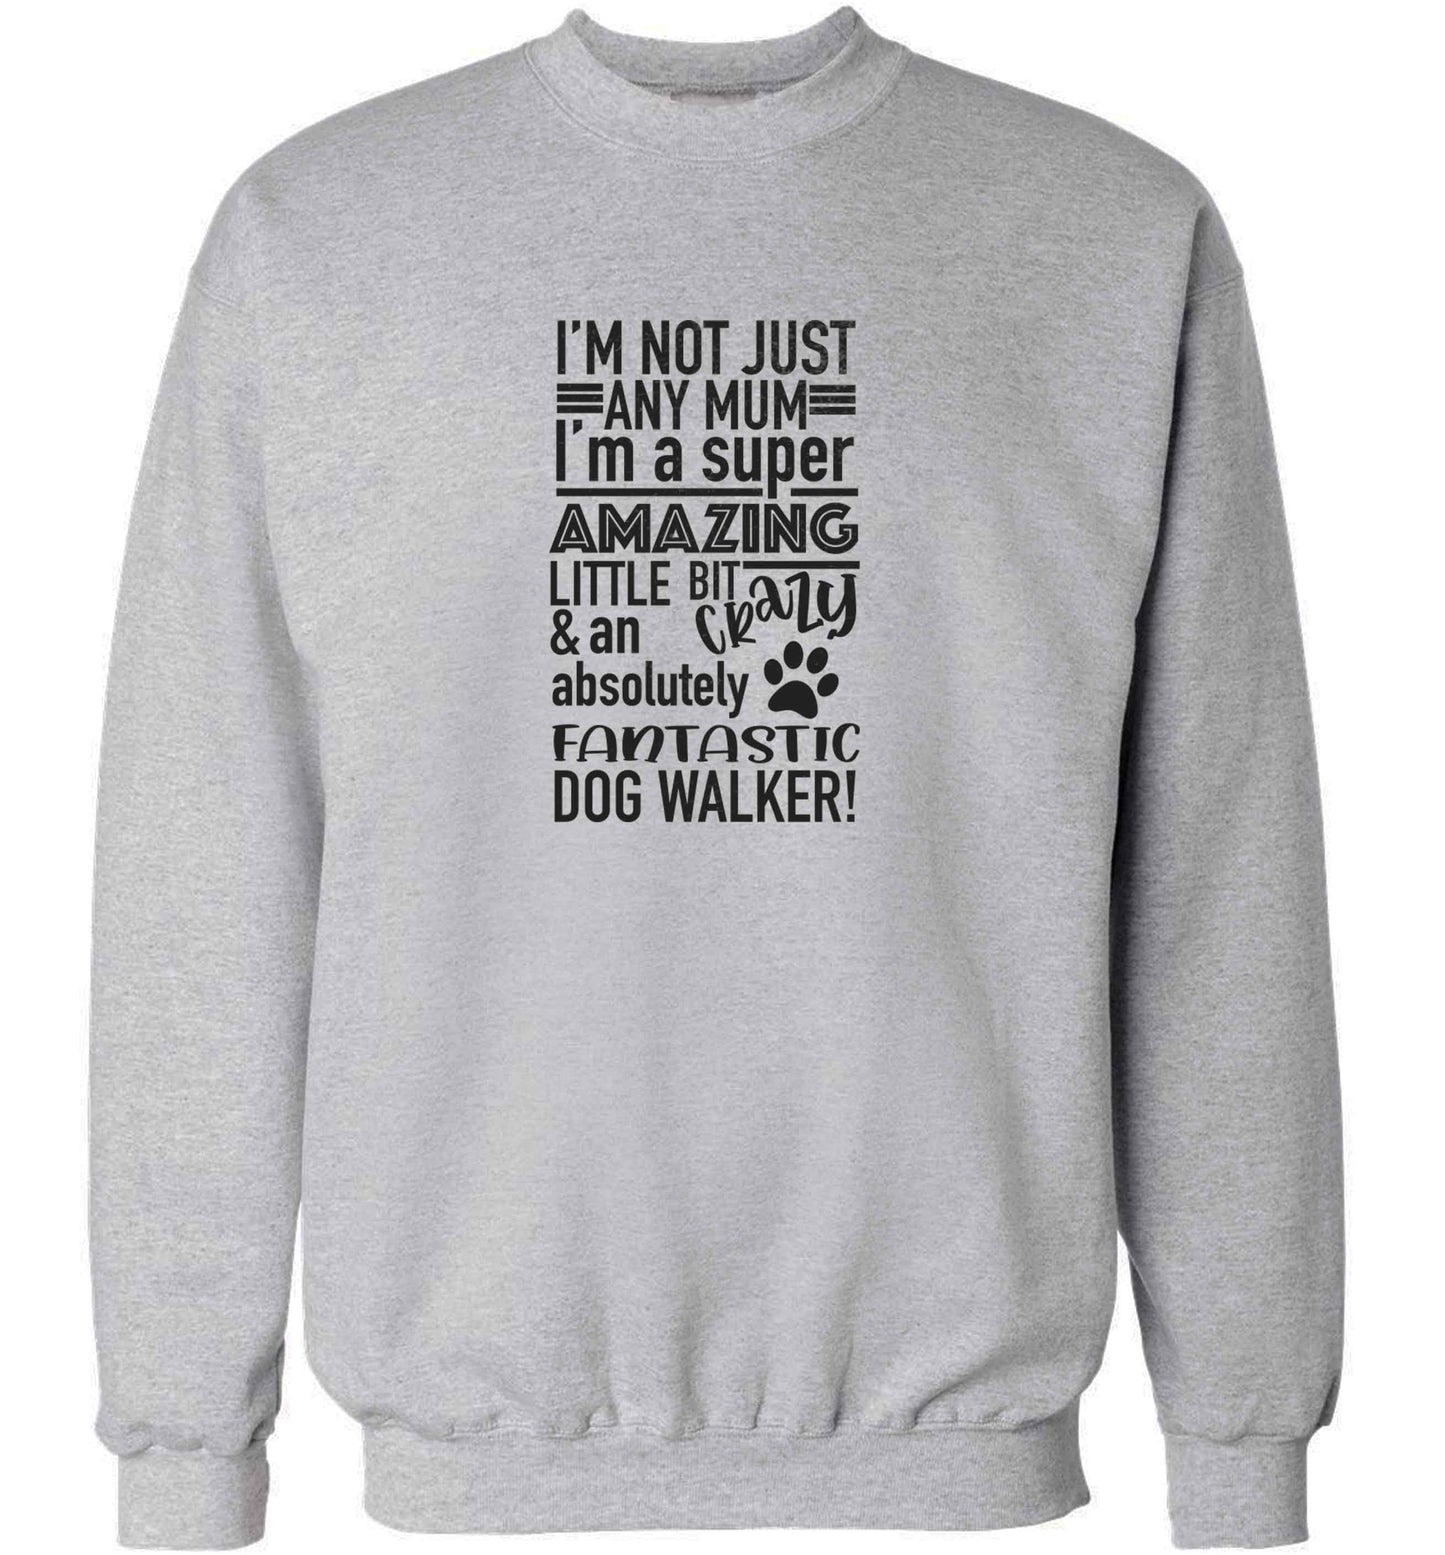 I'm not just any mum I'm a super amazing little bit crazy and an absolutely fantastic dog walker! adult's unisex grey sweater 2XL